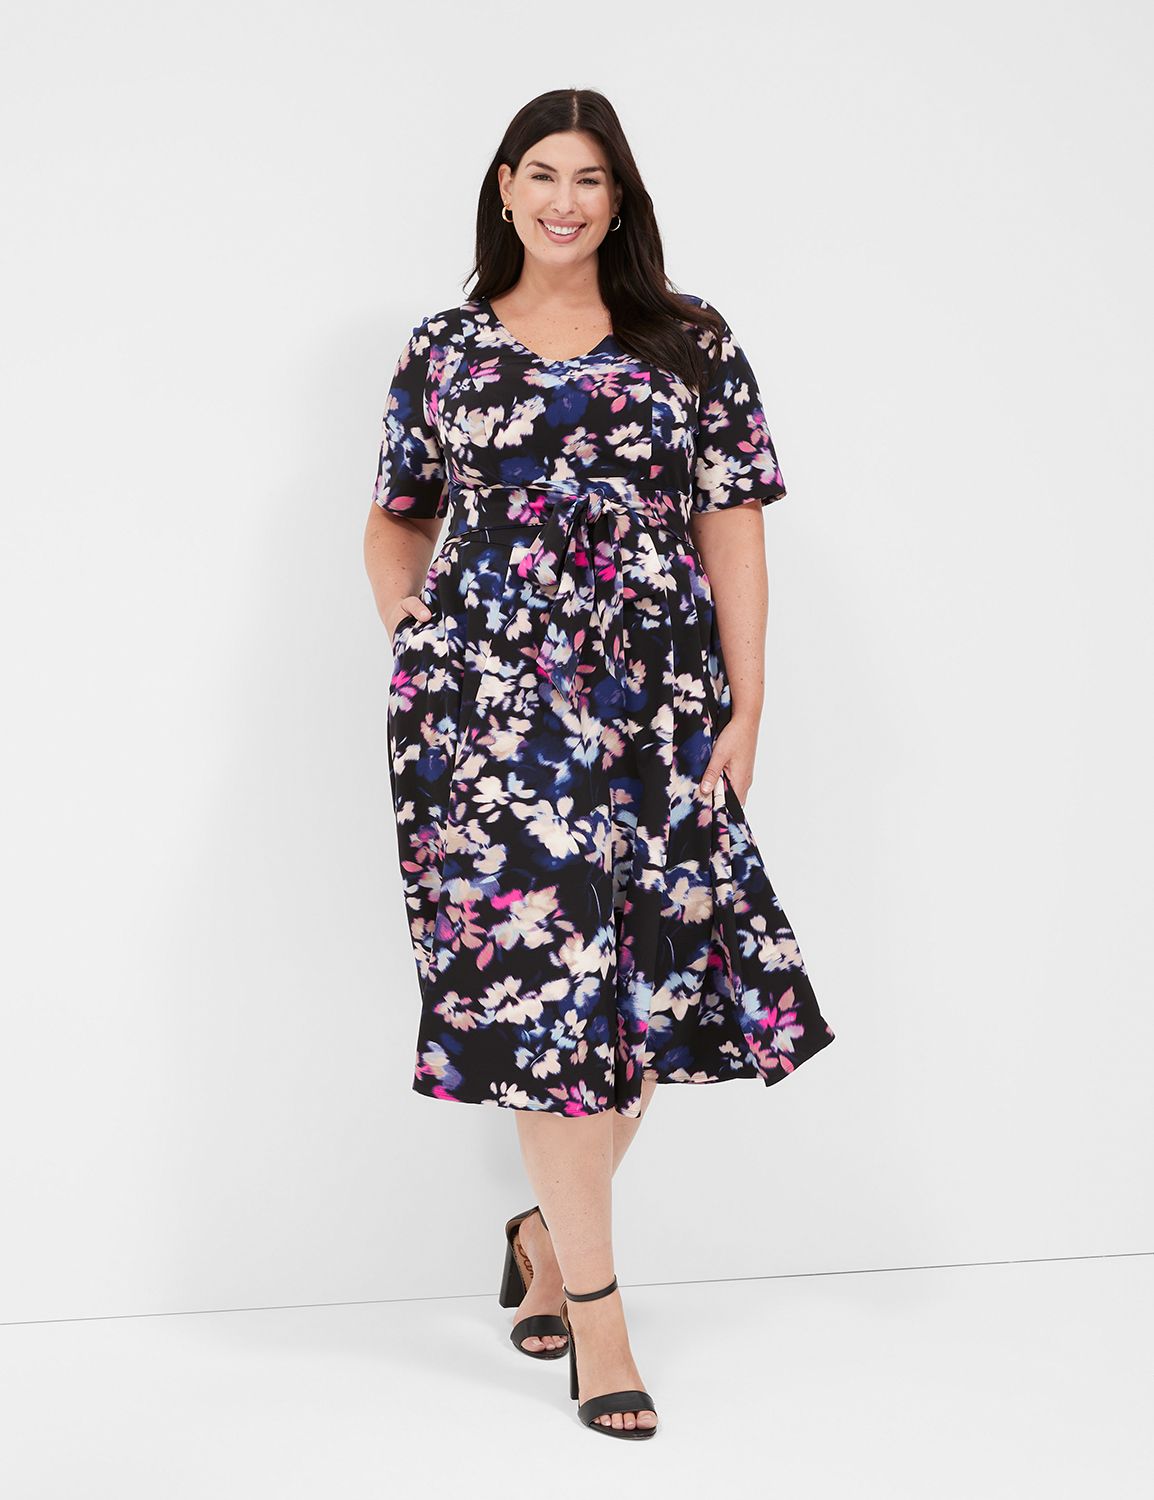 Clearance Plus Size Dresses & Skirts - On Sale Today